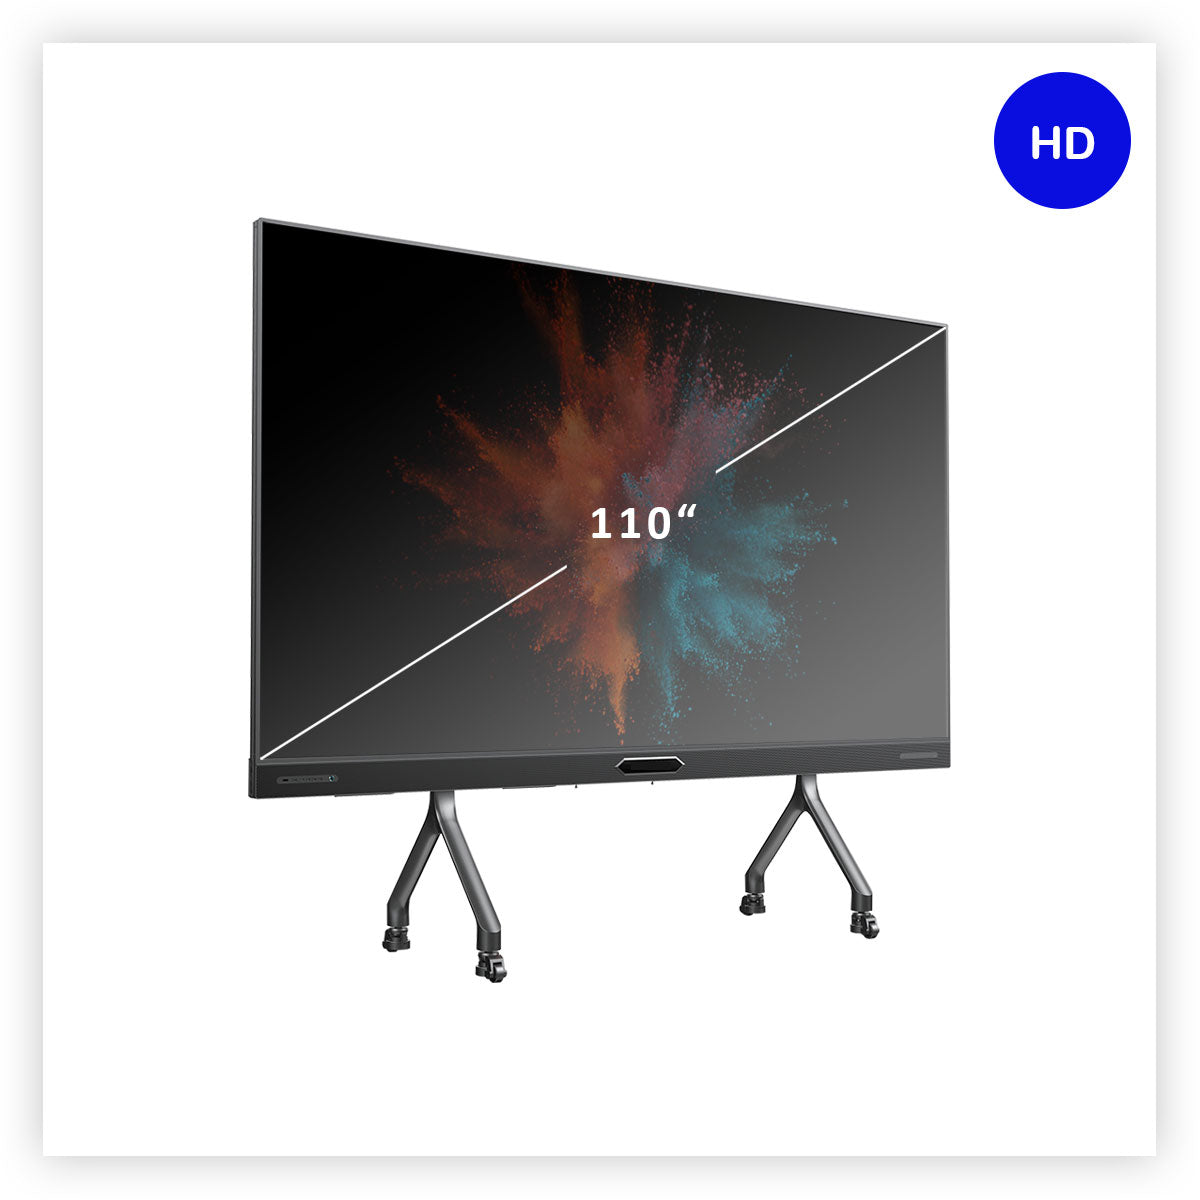 OmniTouch All-in-One HD System 110" P1.2mm